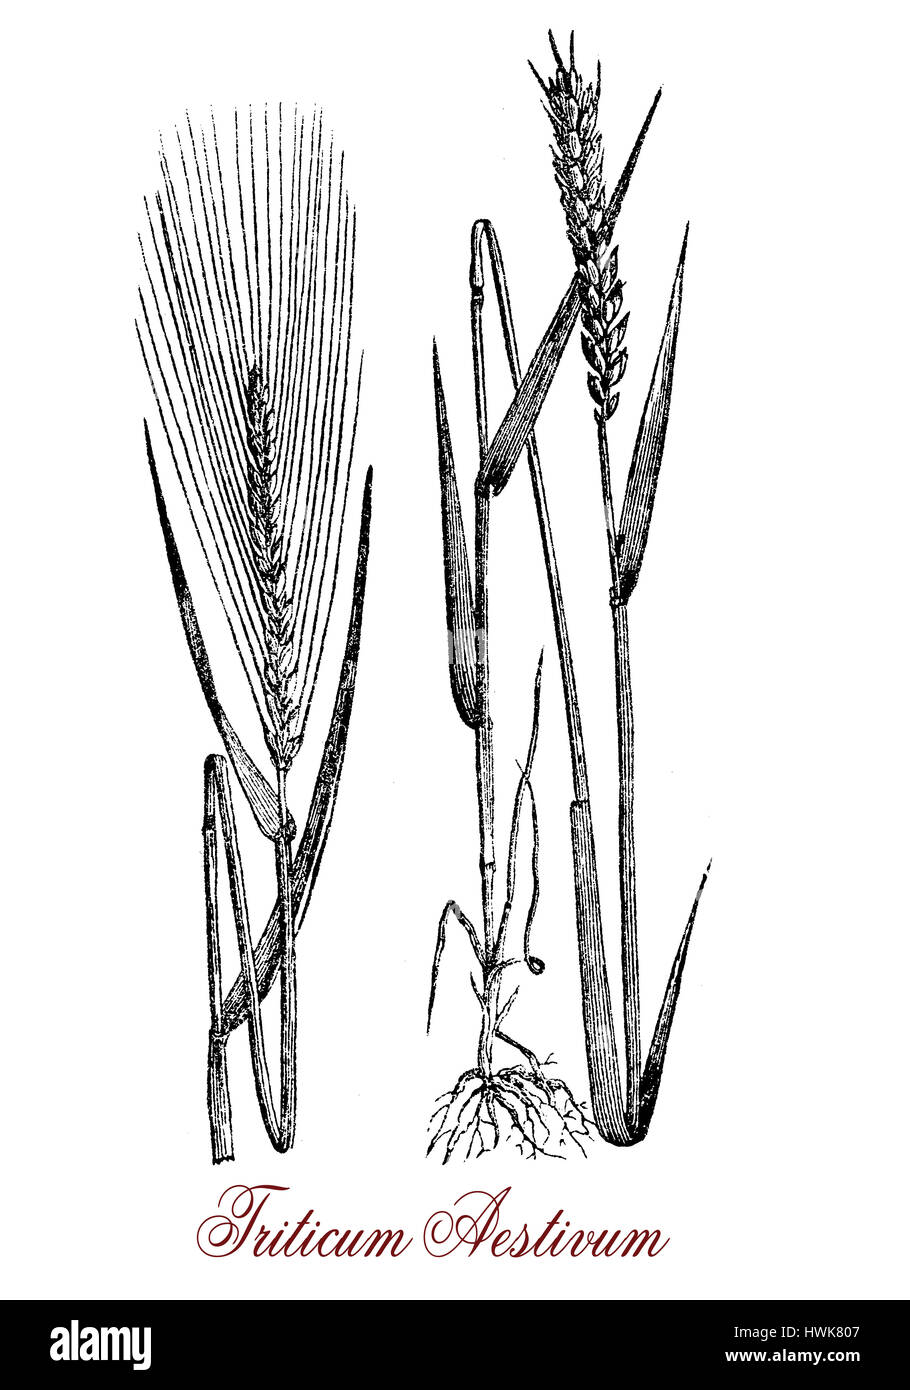 Vintage engraving of common wheat, cereal grain cultivated worldwide as food ingredient dried,crushed or ground with high protein content. The seeds i Stock Photo